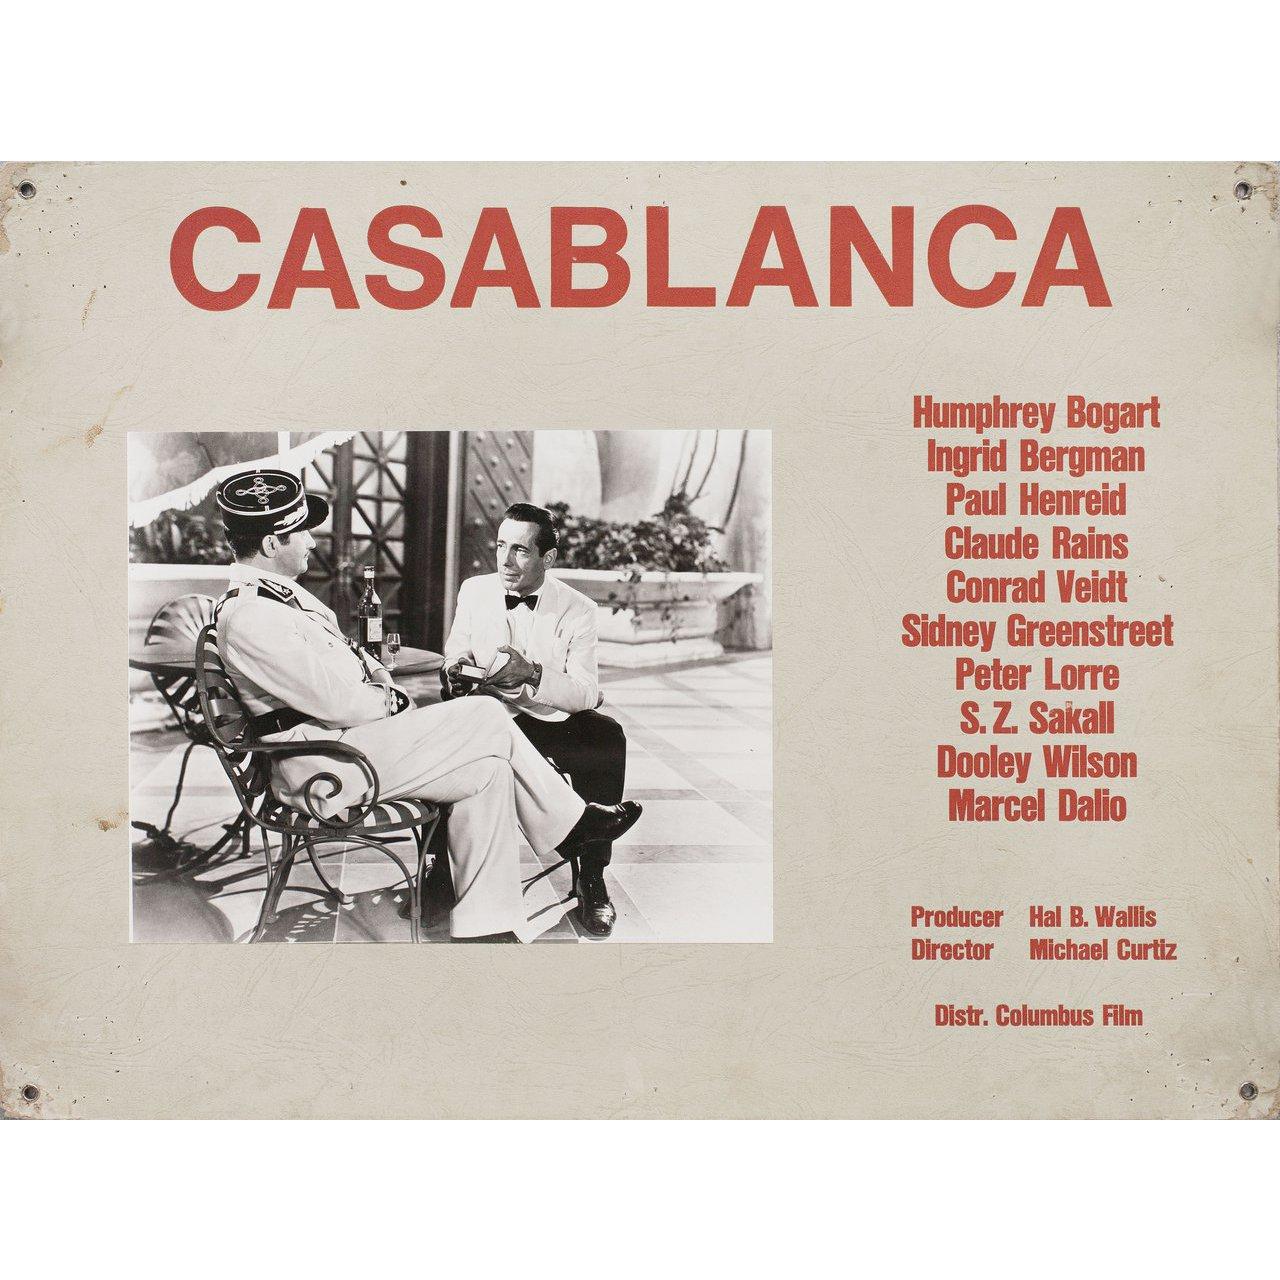 Original 1960s Swiss scene card for the 1942 film “Casablanca” directed by Michael Curtiz with Humphrey Bogart / Ingrid Bergman / Paul Henreid / Claude Rains. Very good-fine condition, pinholes. Please note: The size is stated in inches and the